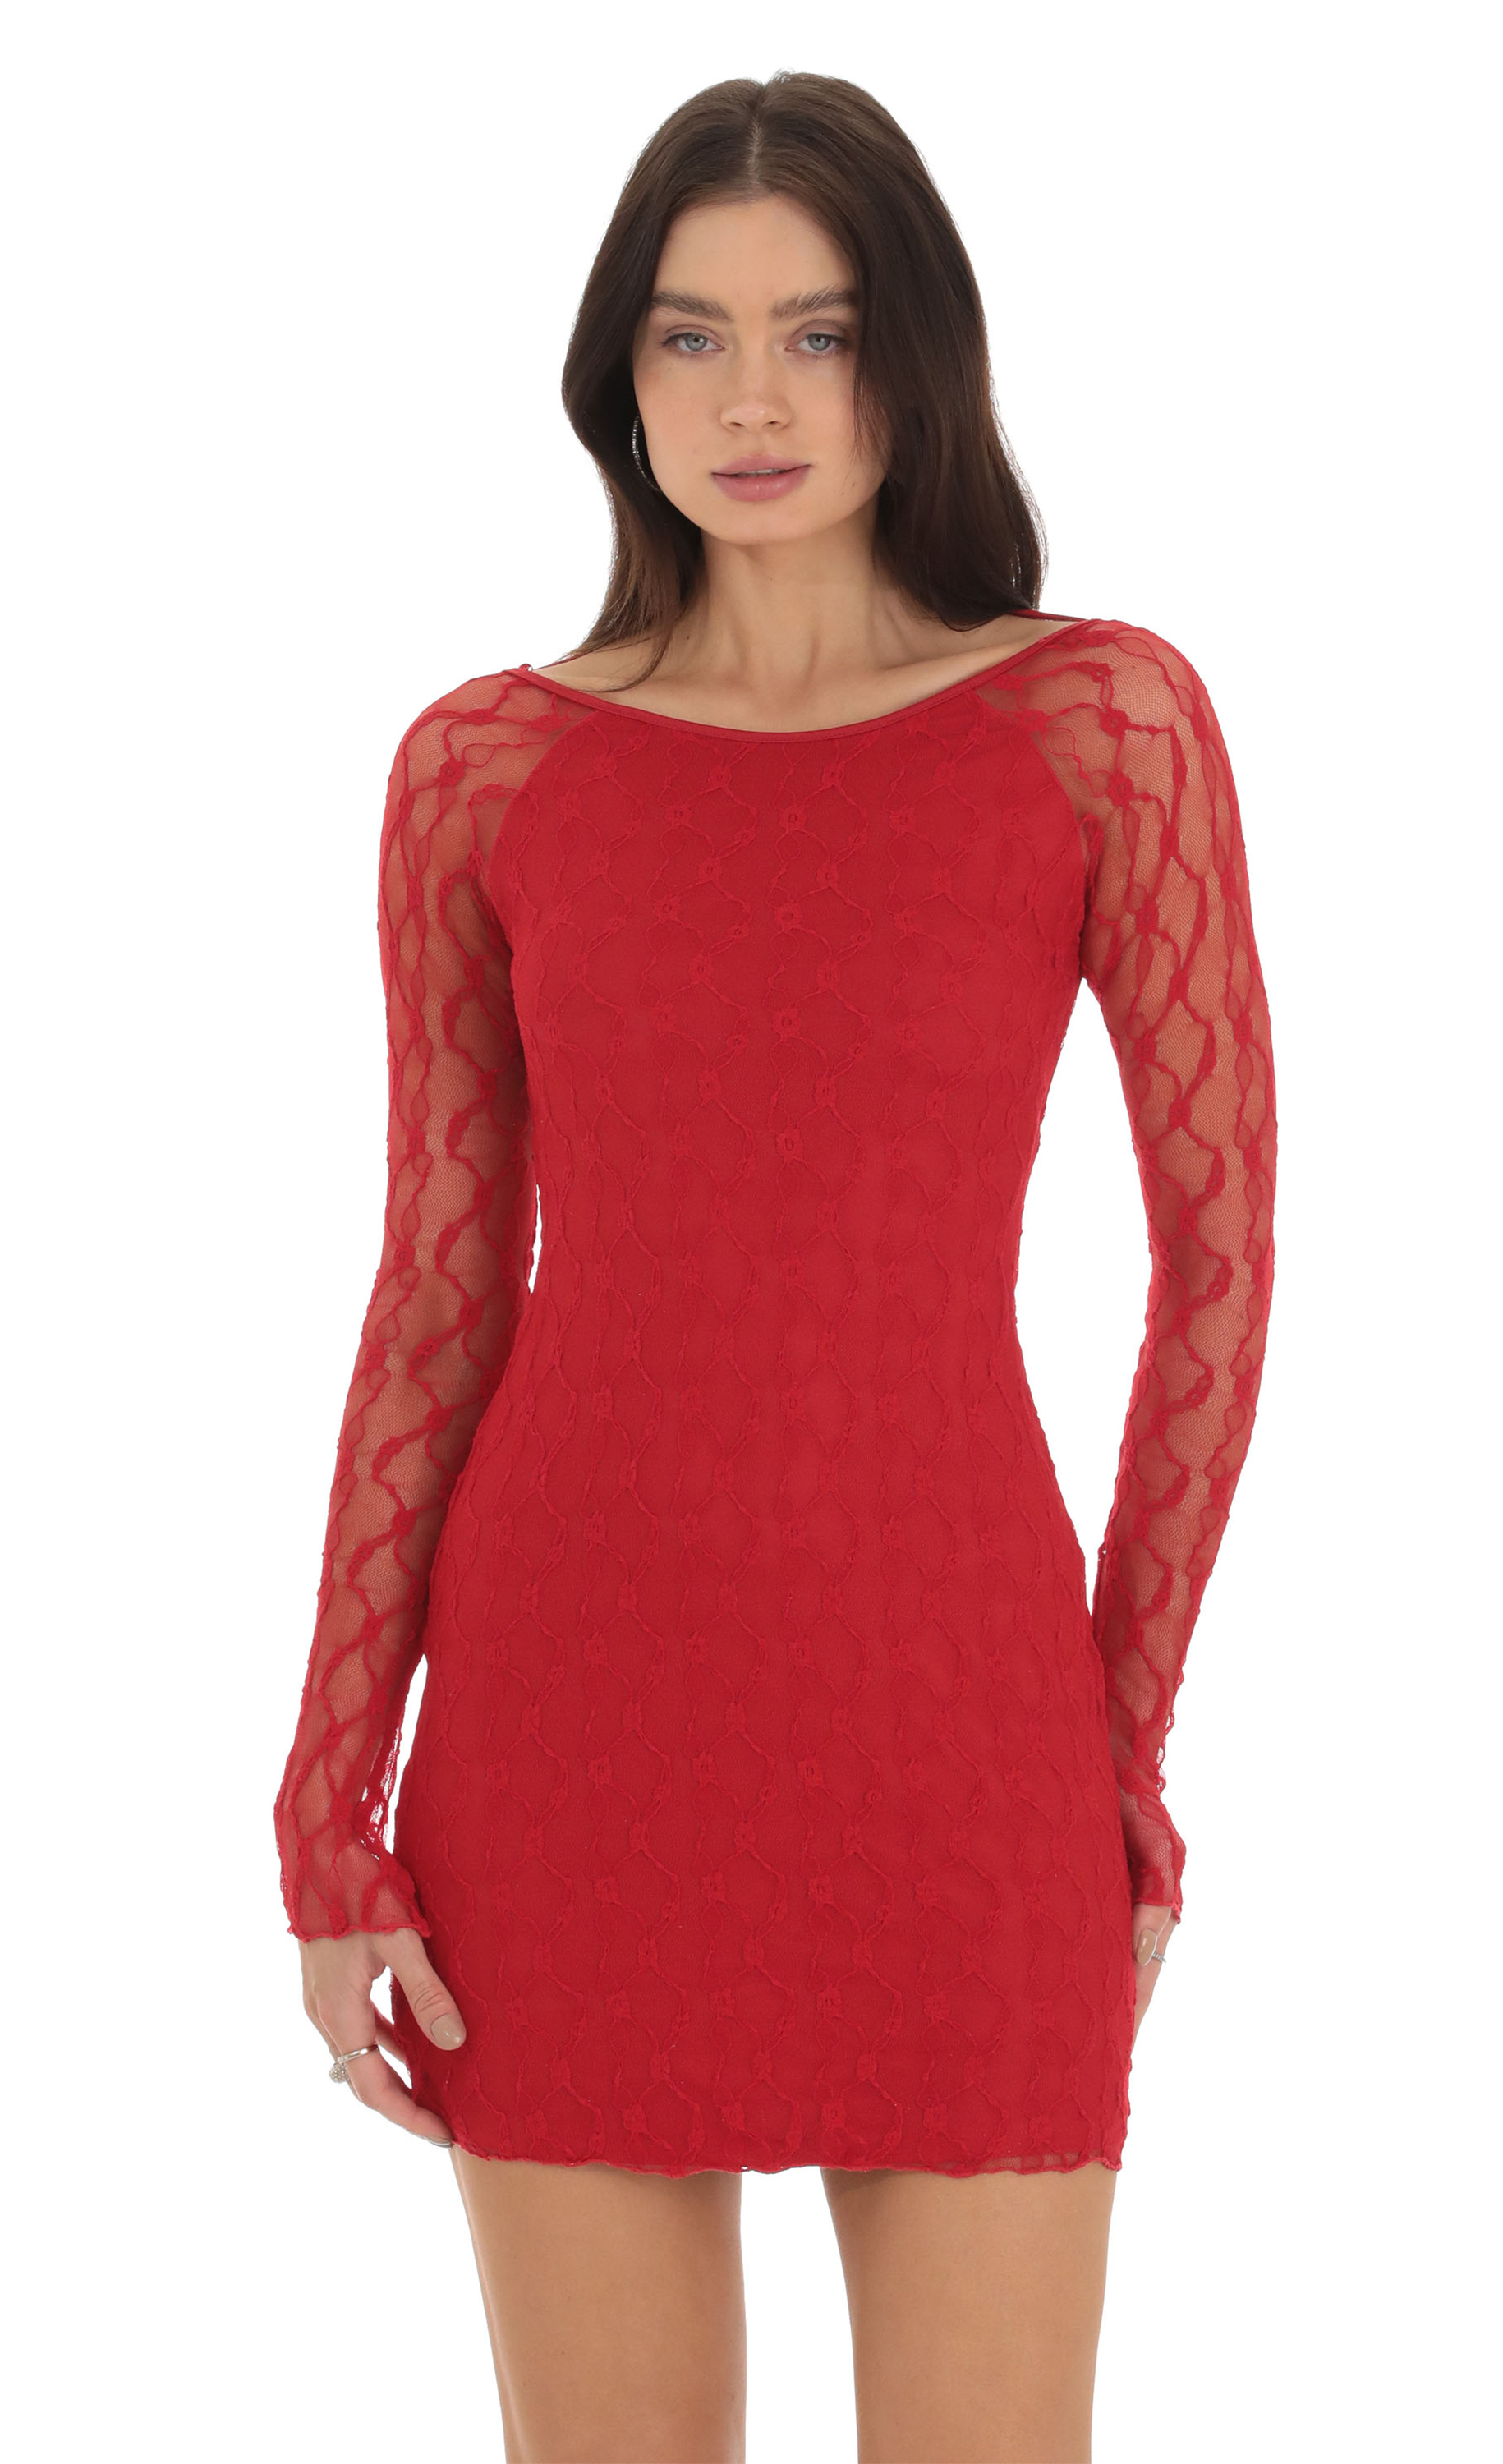 Lace Open Back Bodycon Dress in Red